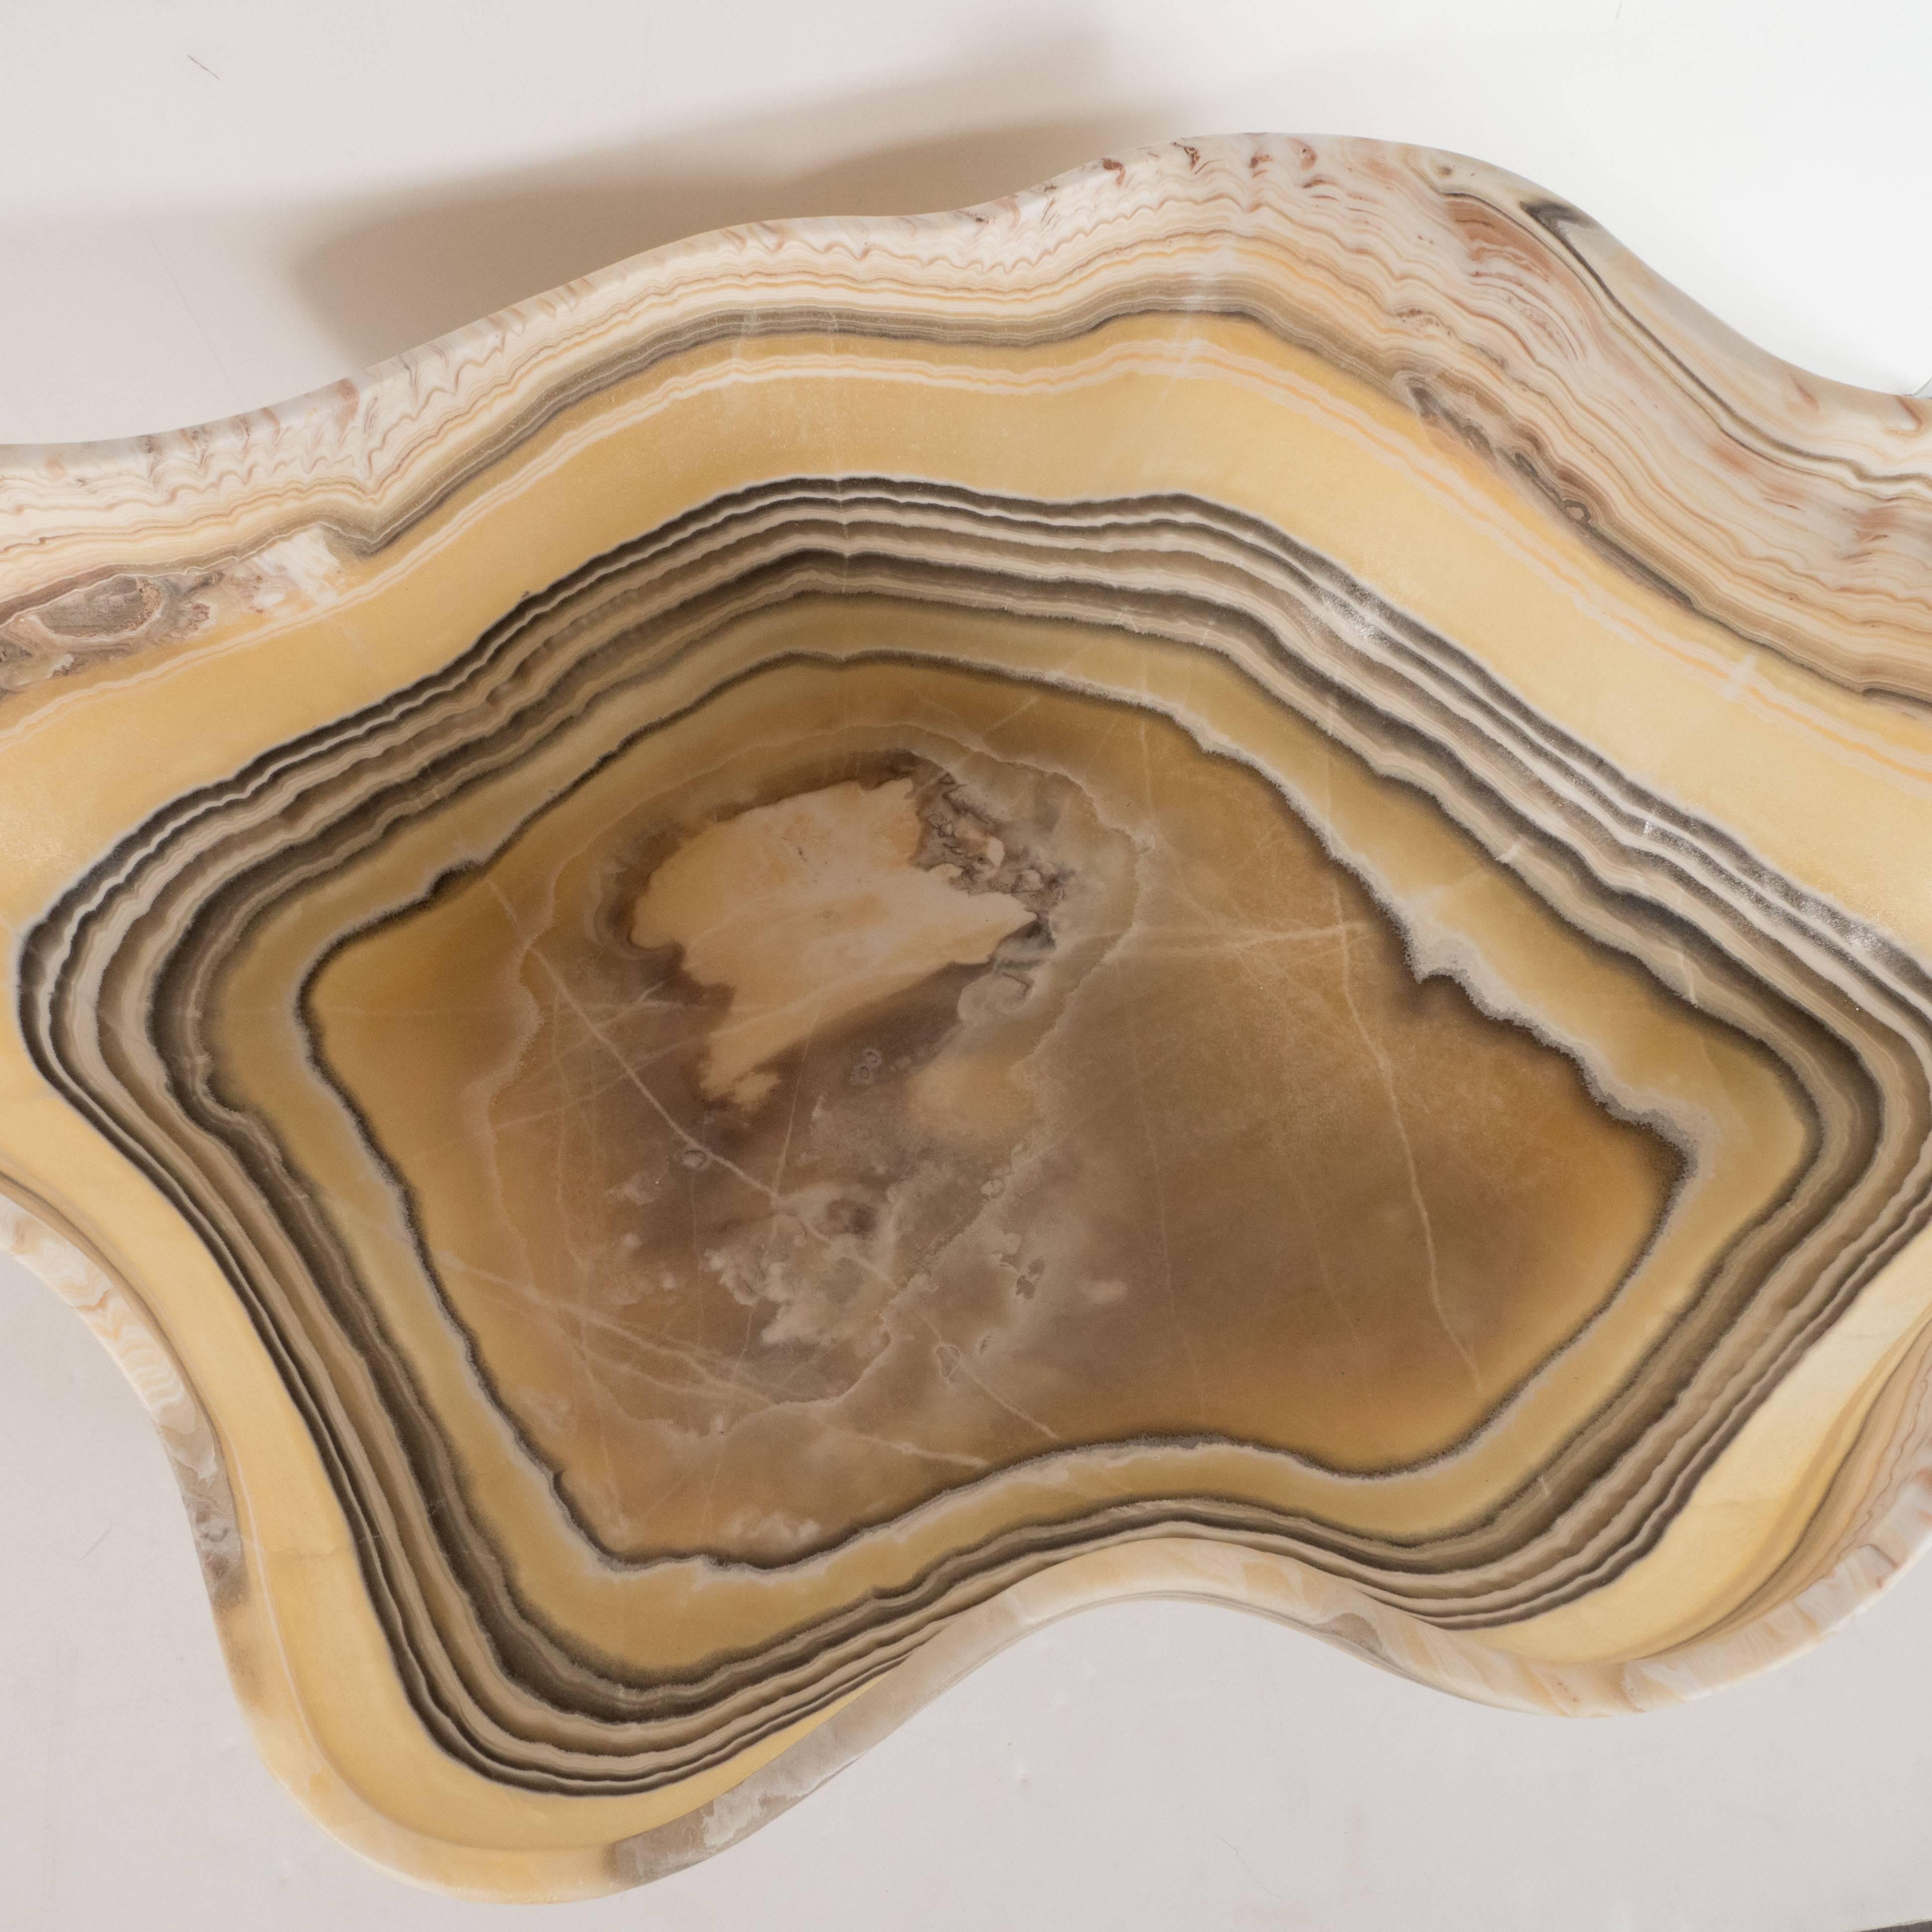 Contemporary Organic Modern Agate Bowl with Grisaille Bands against a Honeyed Background